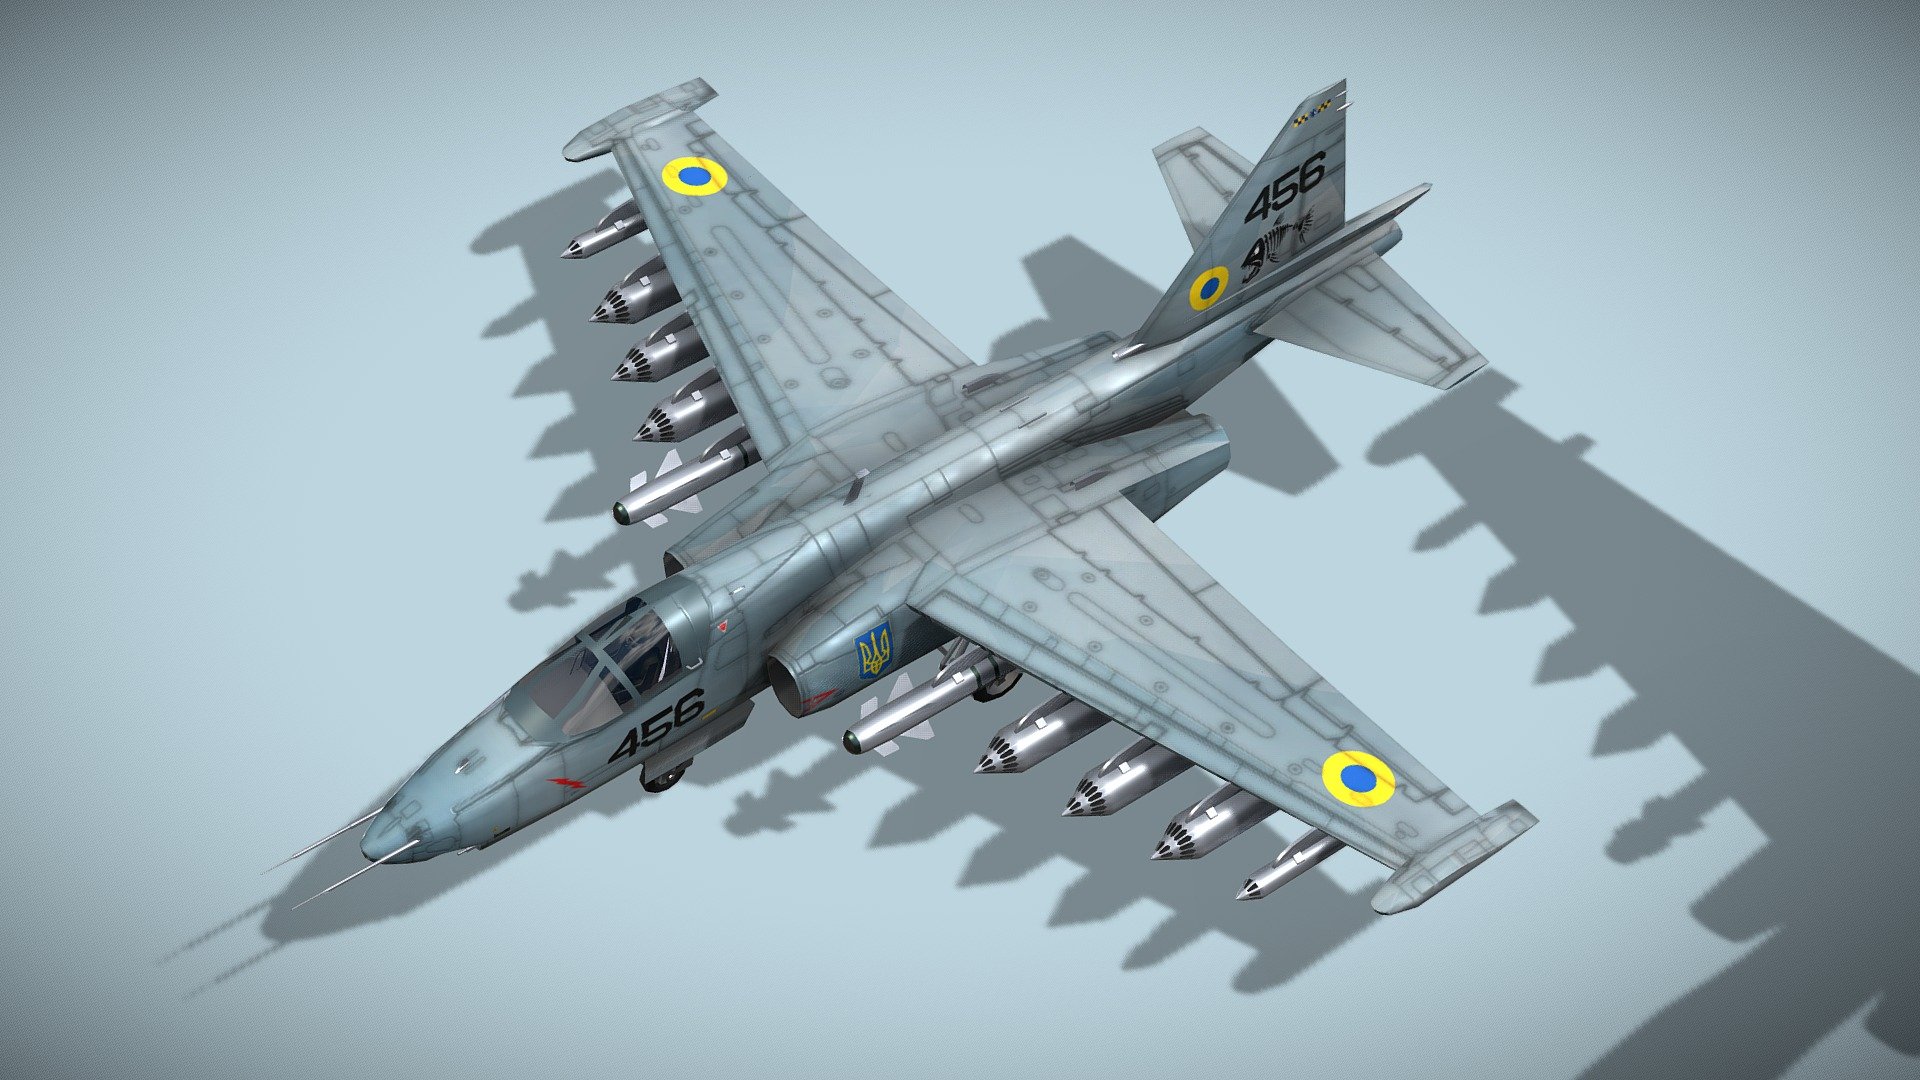 Sukhoi SU-25 Frogfoot

Lowpoly model of russian jet attack plane.



Sukhoi Su-25 Frogfoot is a subsonic, single-seat, twin-engine jet aircraft developed in the Soviet Union by Sukhoi. It was designed to provide close air support for Soviet Ground Forces. The first prototype made its maiden flight on 22 February 1975. After testing, the aircraft went into series production in 1978 in Tbilisi in the Georgian Soviet Socialist Republic. Production of the Su-25 ended in 2017 in Russia and 2010 in Georgia. Attempts continue to be made to restart production in Georgia using partially completed airframes, but as of 2022 no new deliveries have been reported.



Fully rigged

Model has roughness map and 2 x diffuse textures

Including 3D print STL file



Check also my aircrafts and cars

Patreon with monthly free model - Sukhoi SU-25 Frogfoot - Buy Royalty Free 3D model by NETRUNNER_pl 3d model